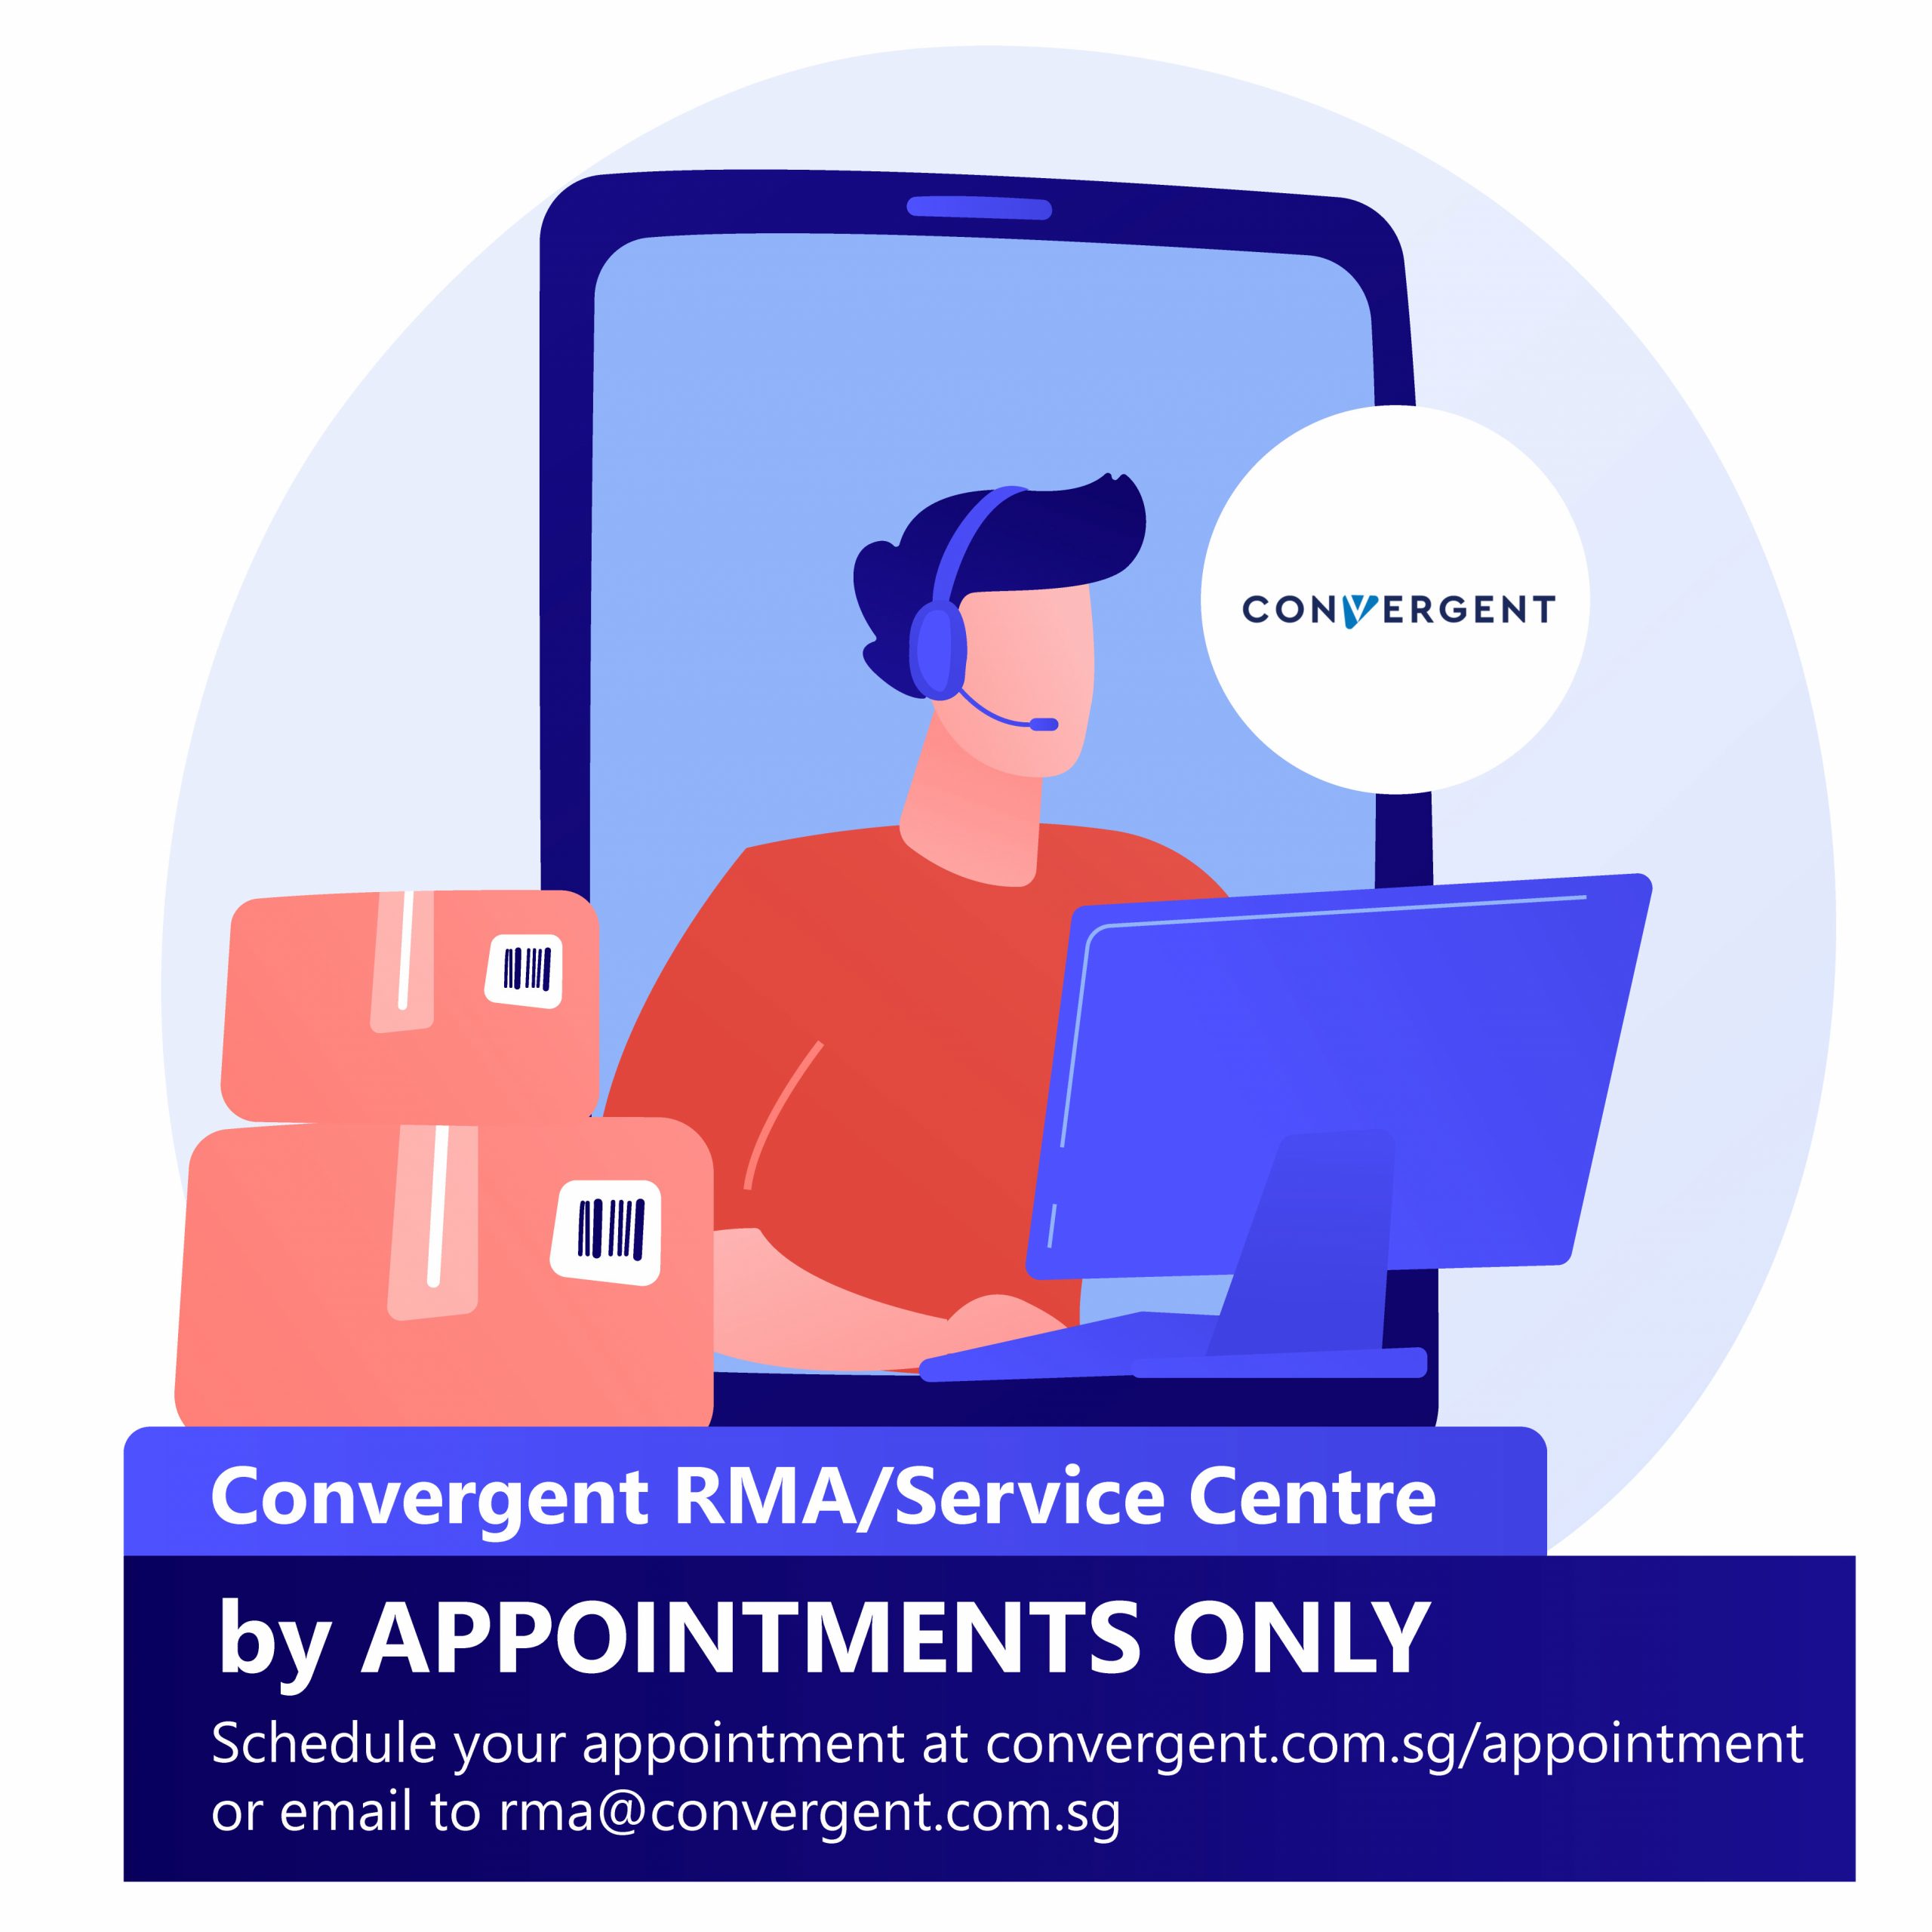 Convergent RMA/Service Centre is operating by APPOINTMENTS ONLY